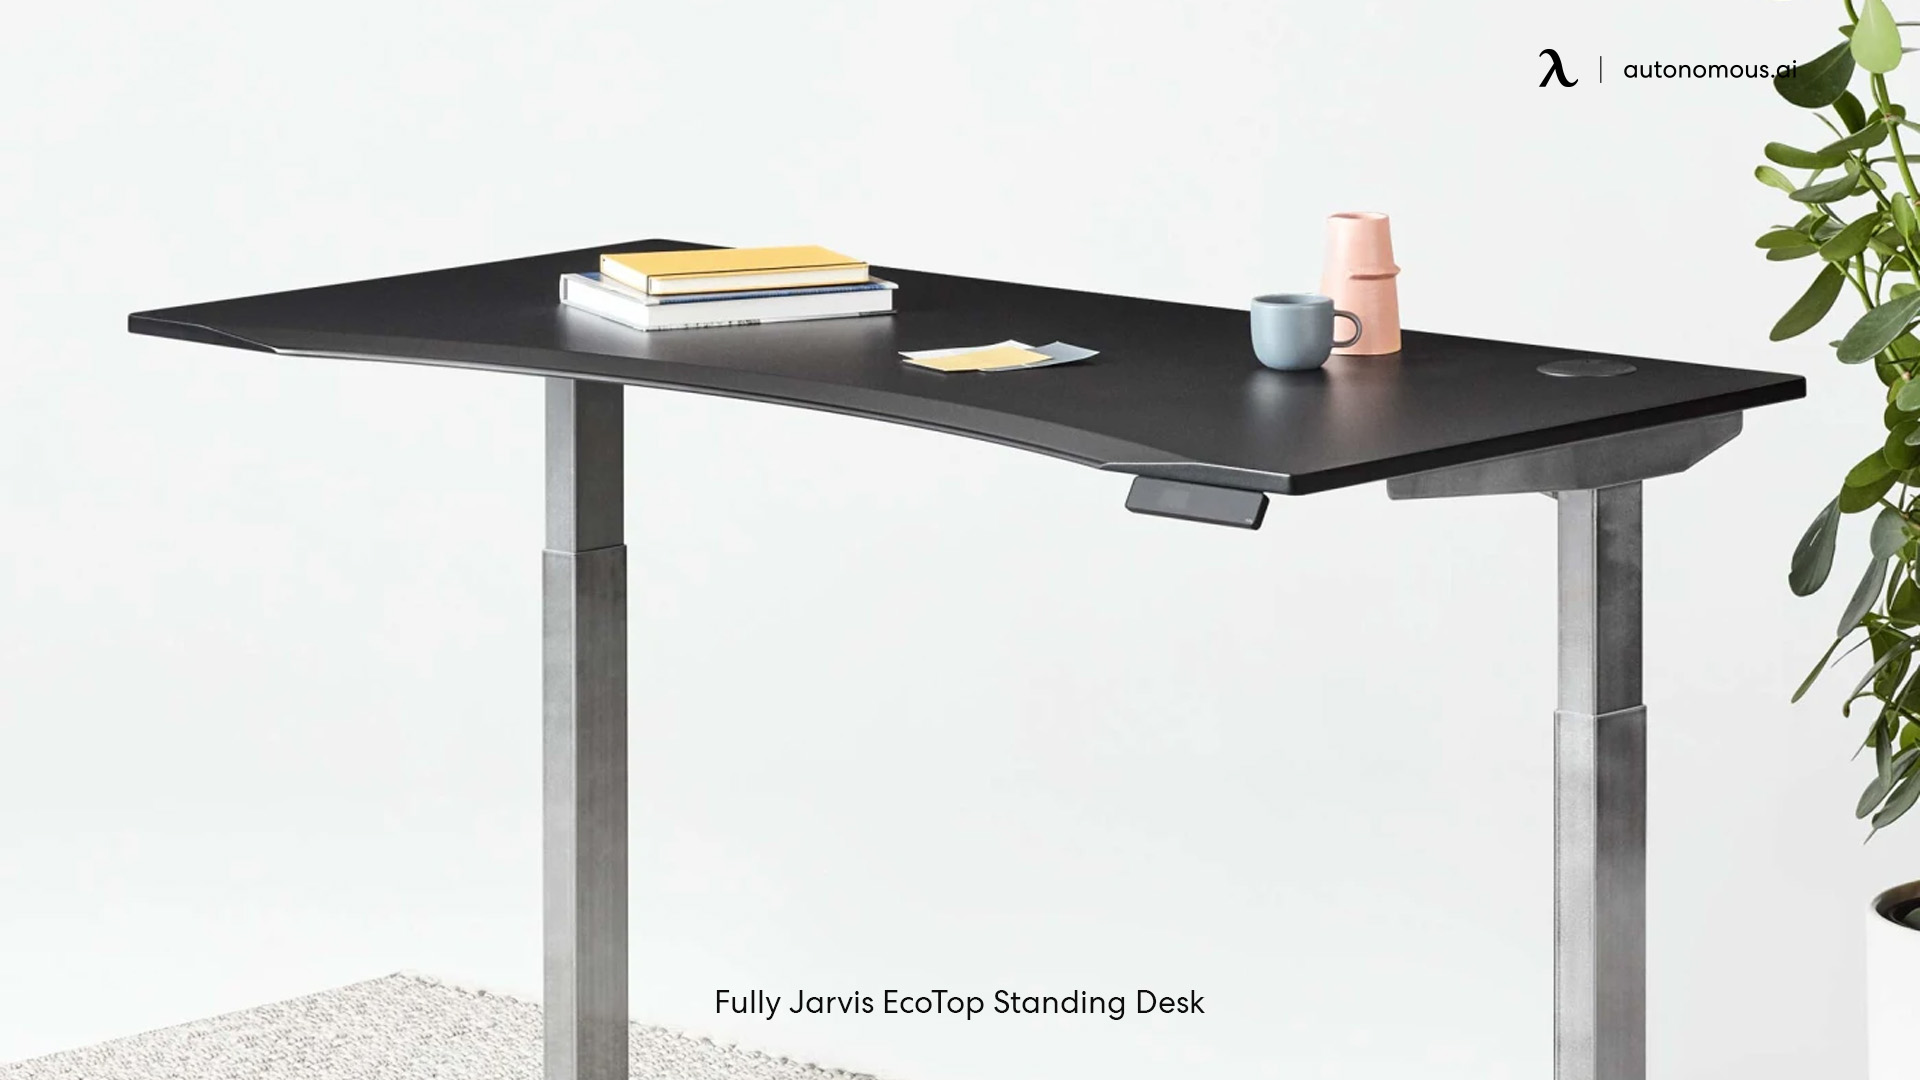 Fully Jarvis EcoTop Standing Desk